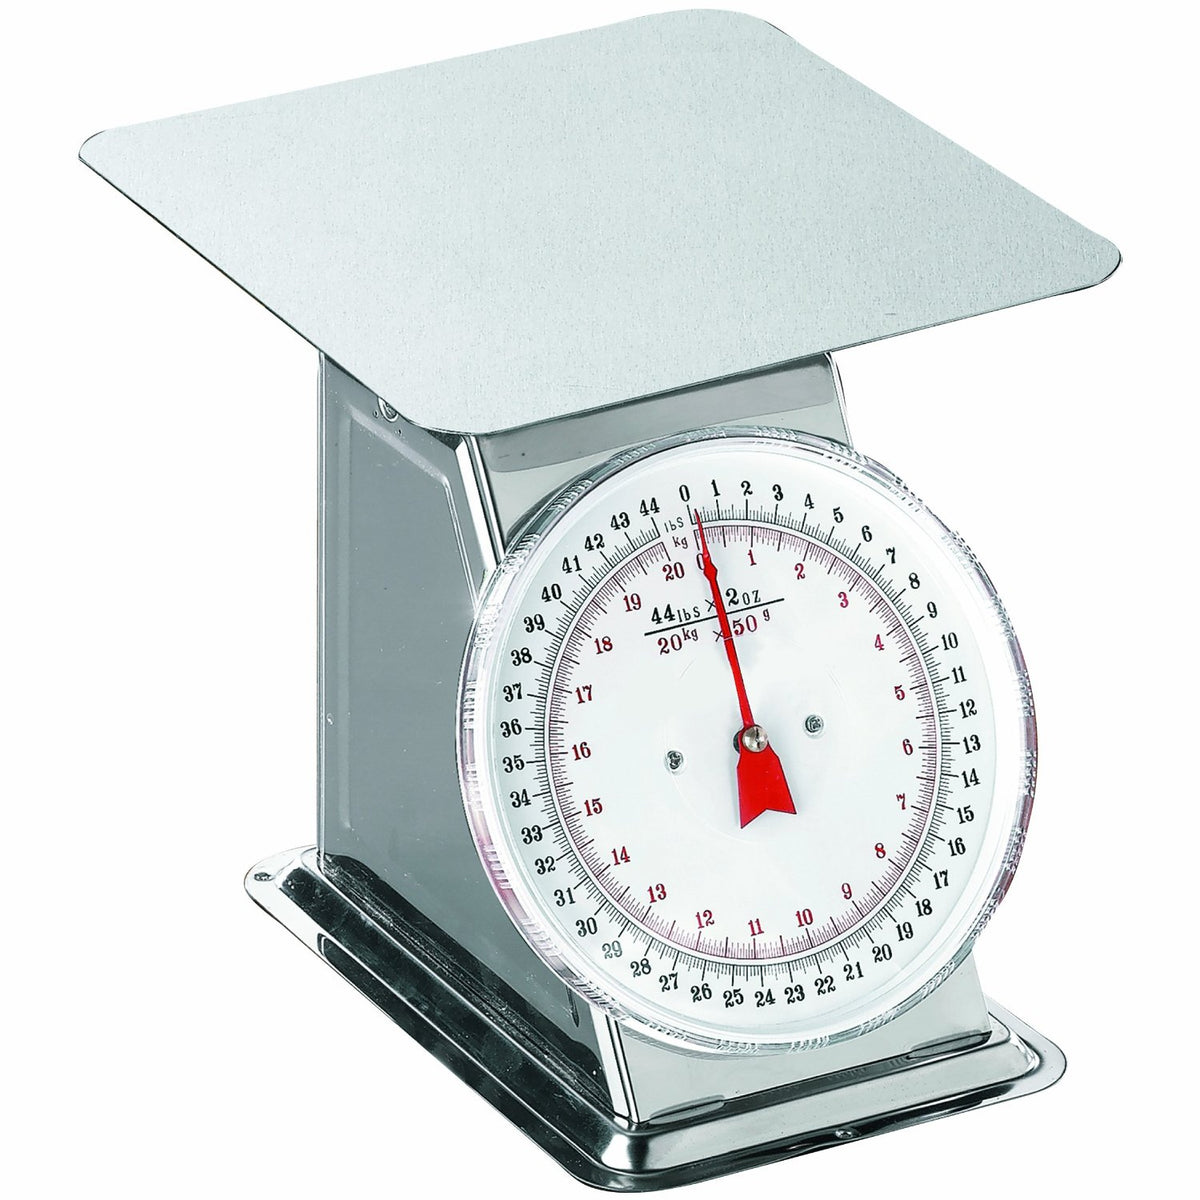 Weston 24-0302 Stainless Steel Flat Top Dial Scale, 44 lbs